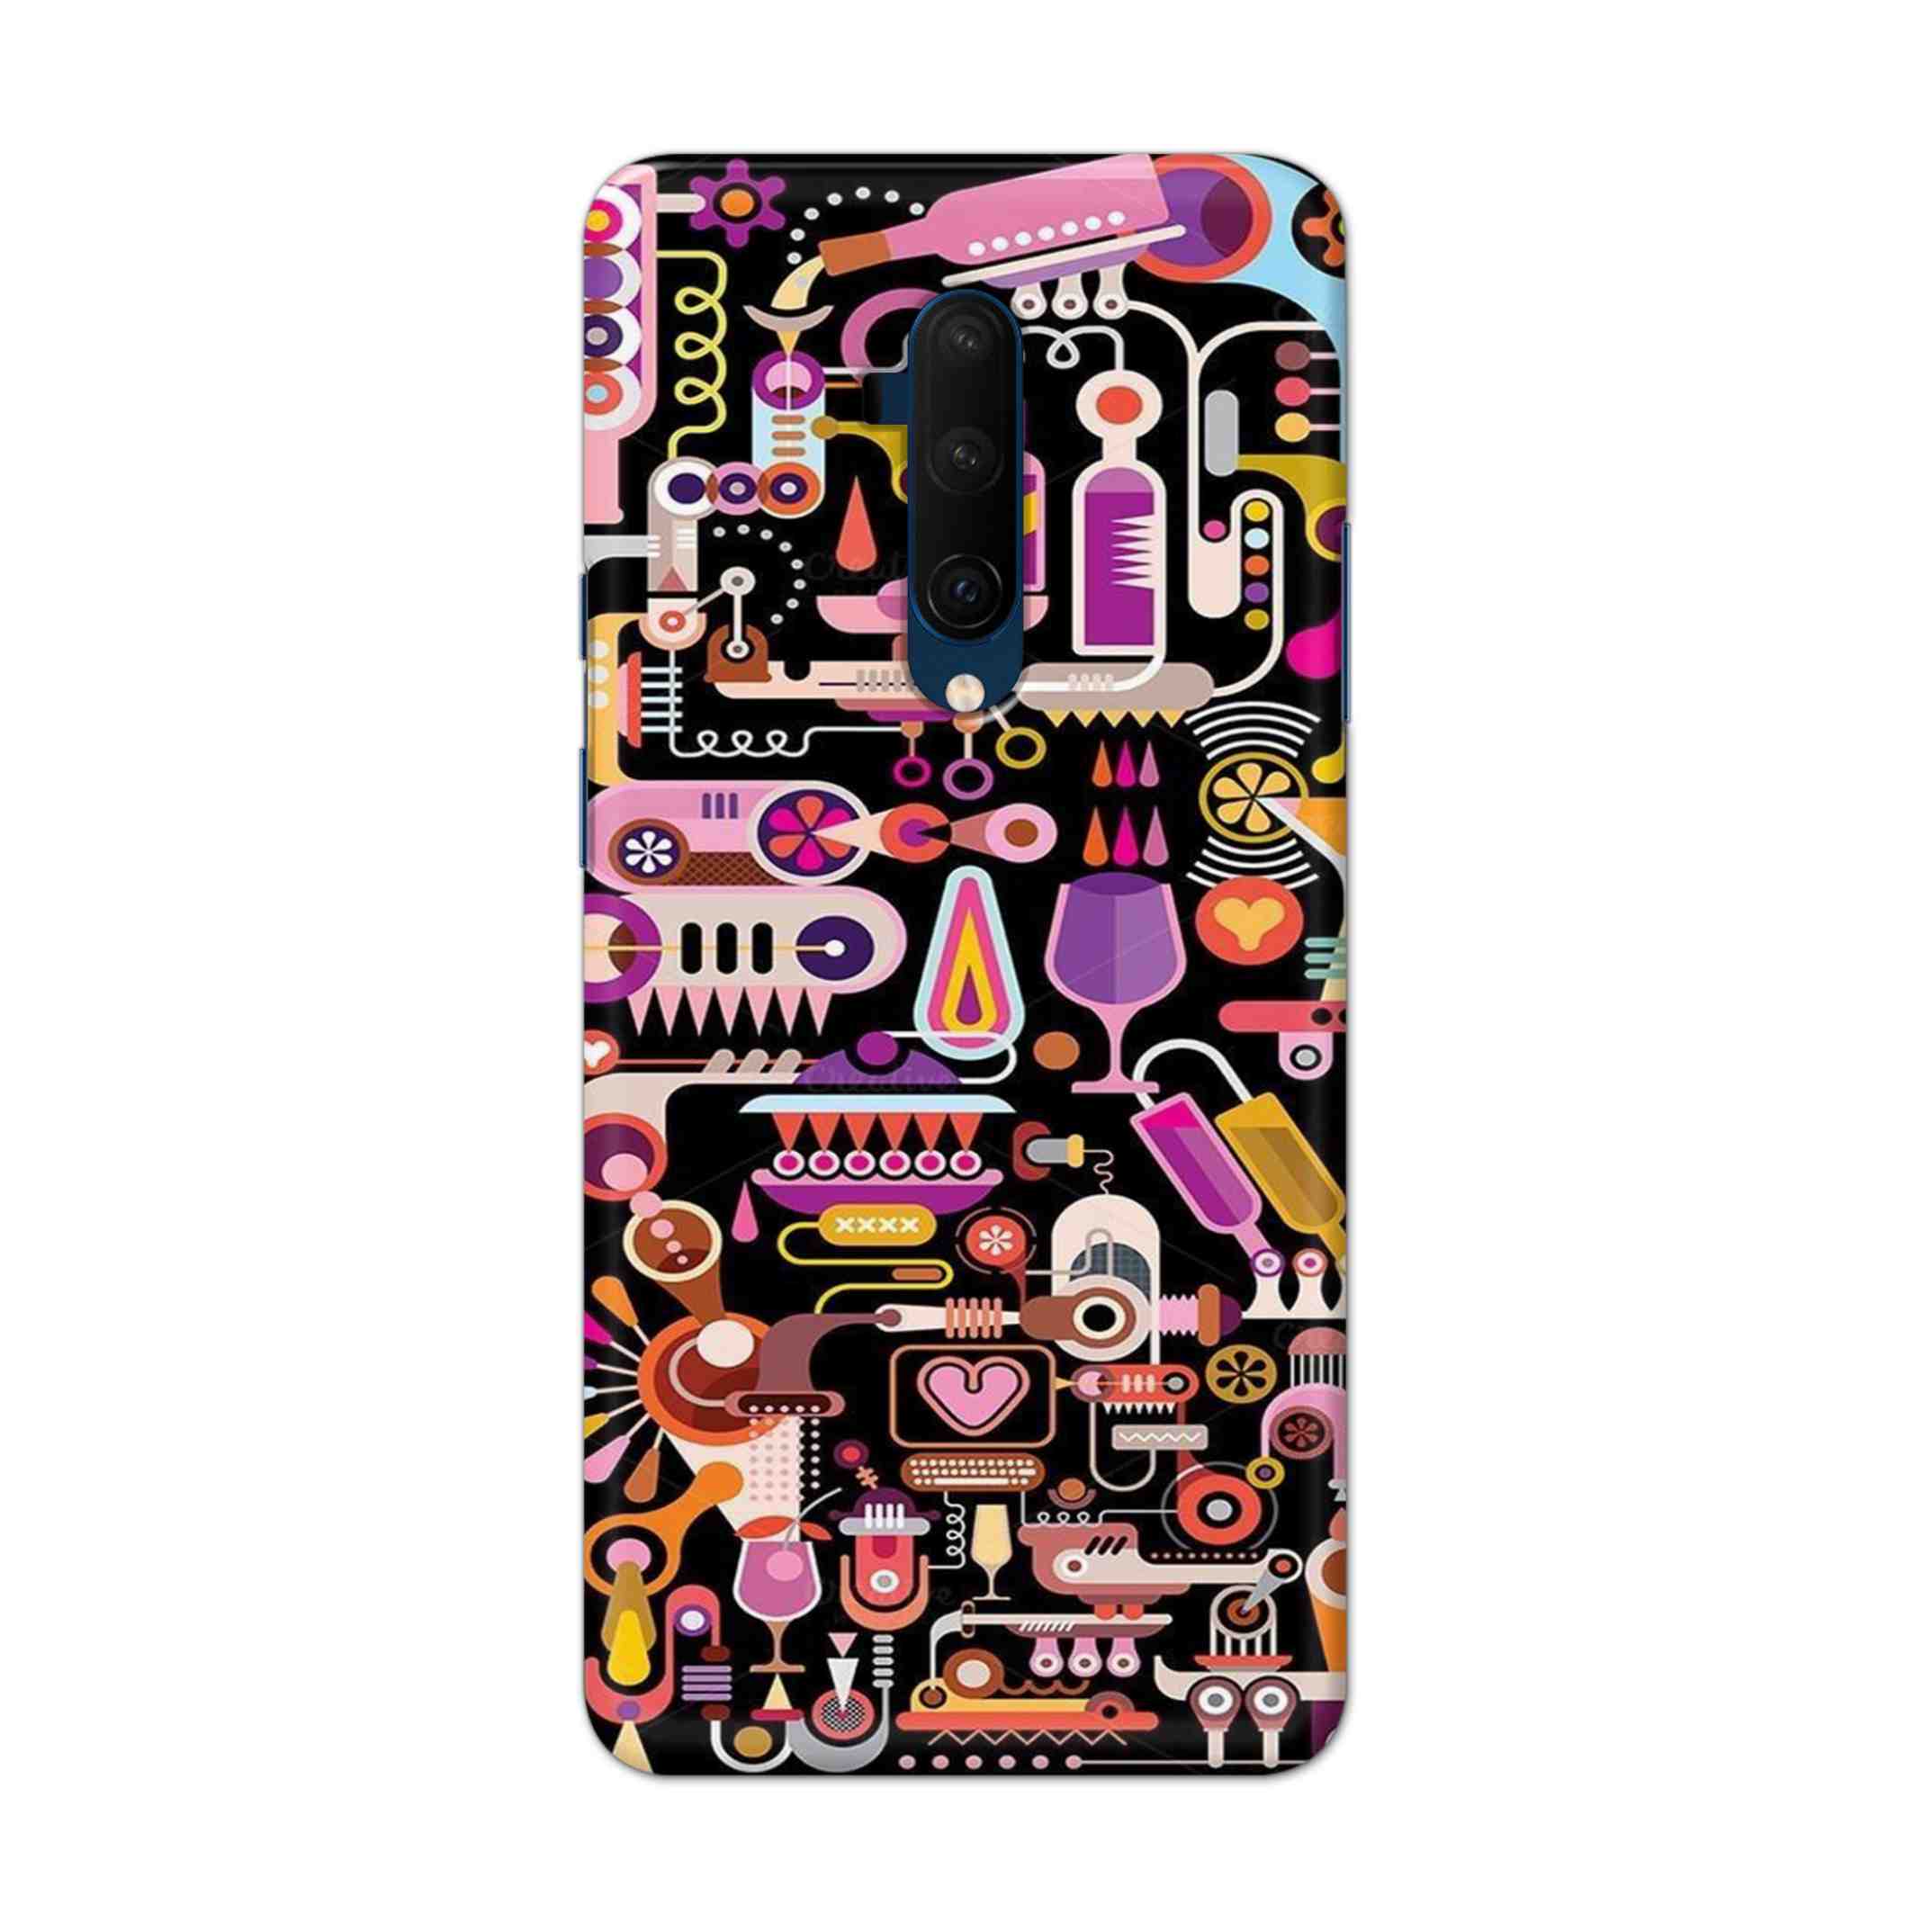 Buy Lab Art Hard Back Mobile Phone Case Cover For OnePlus 7T Pro Online